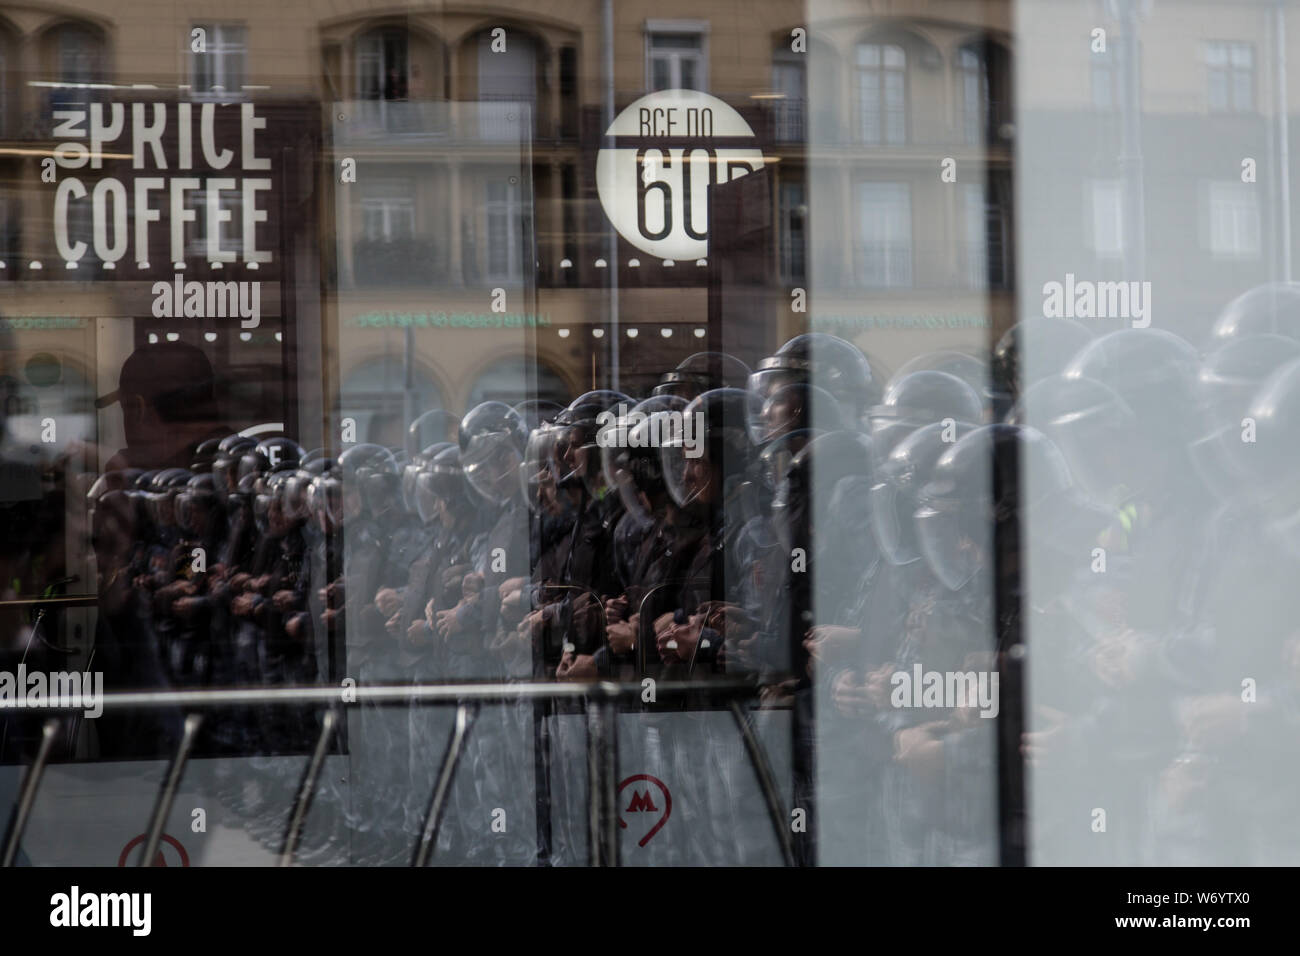 Police block a street during an unsanctioned rally in the centre of Moscow.Moscow police detained more than 300 people who were protesting against the exclusion of some independent and opposition candidates from the city council ballot, a monitoring group said. Stock Photo